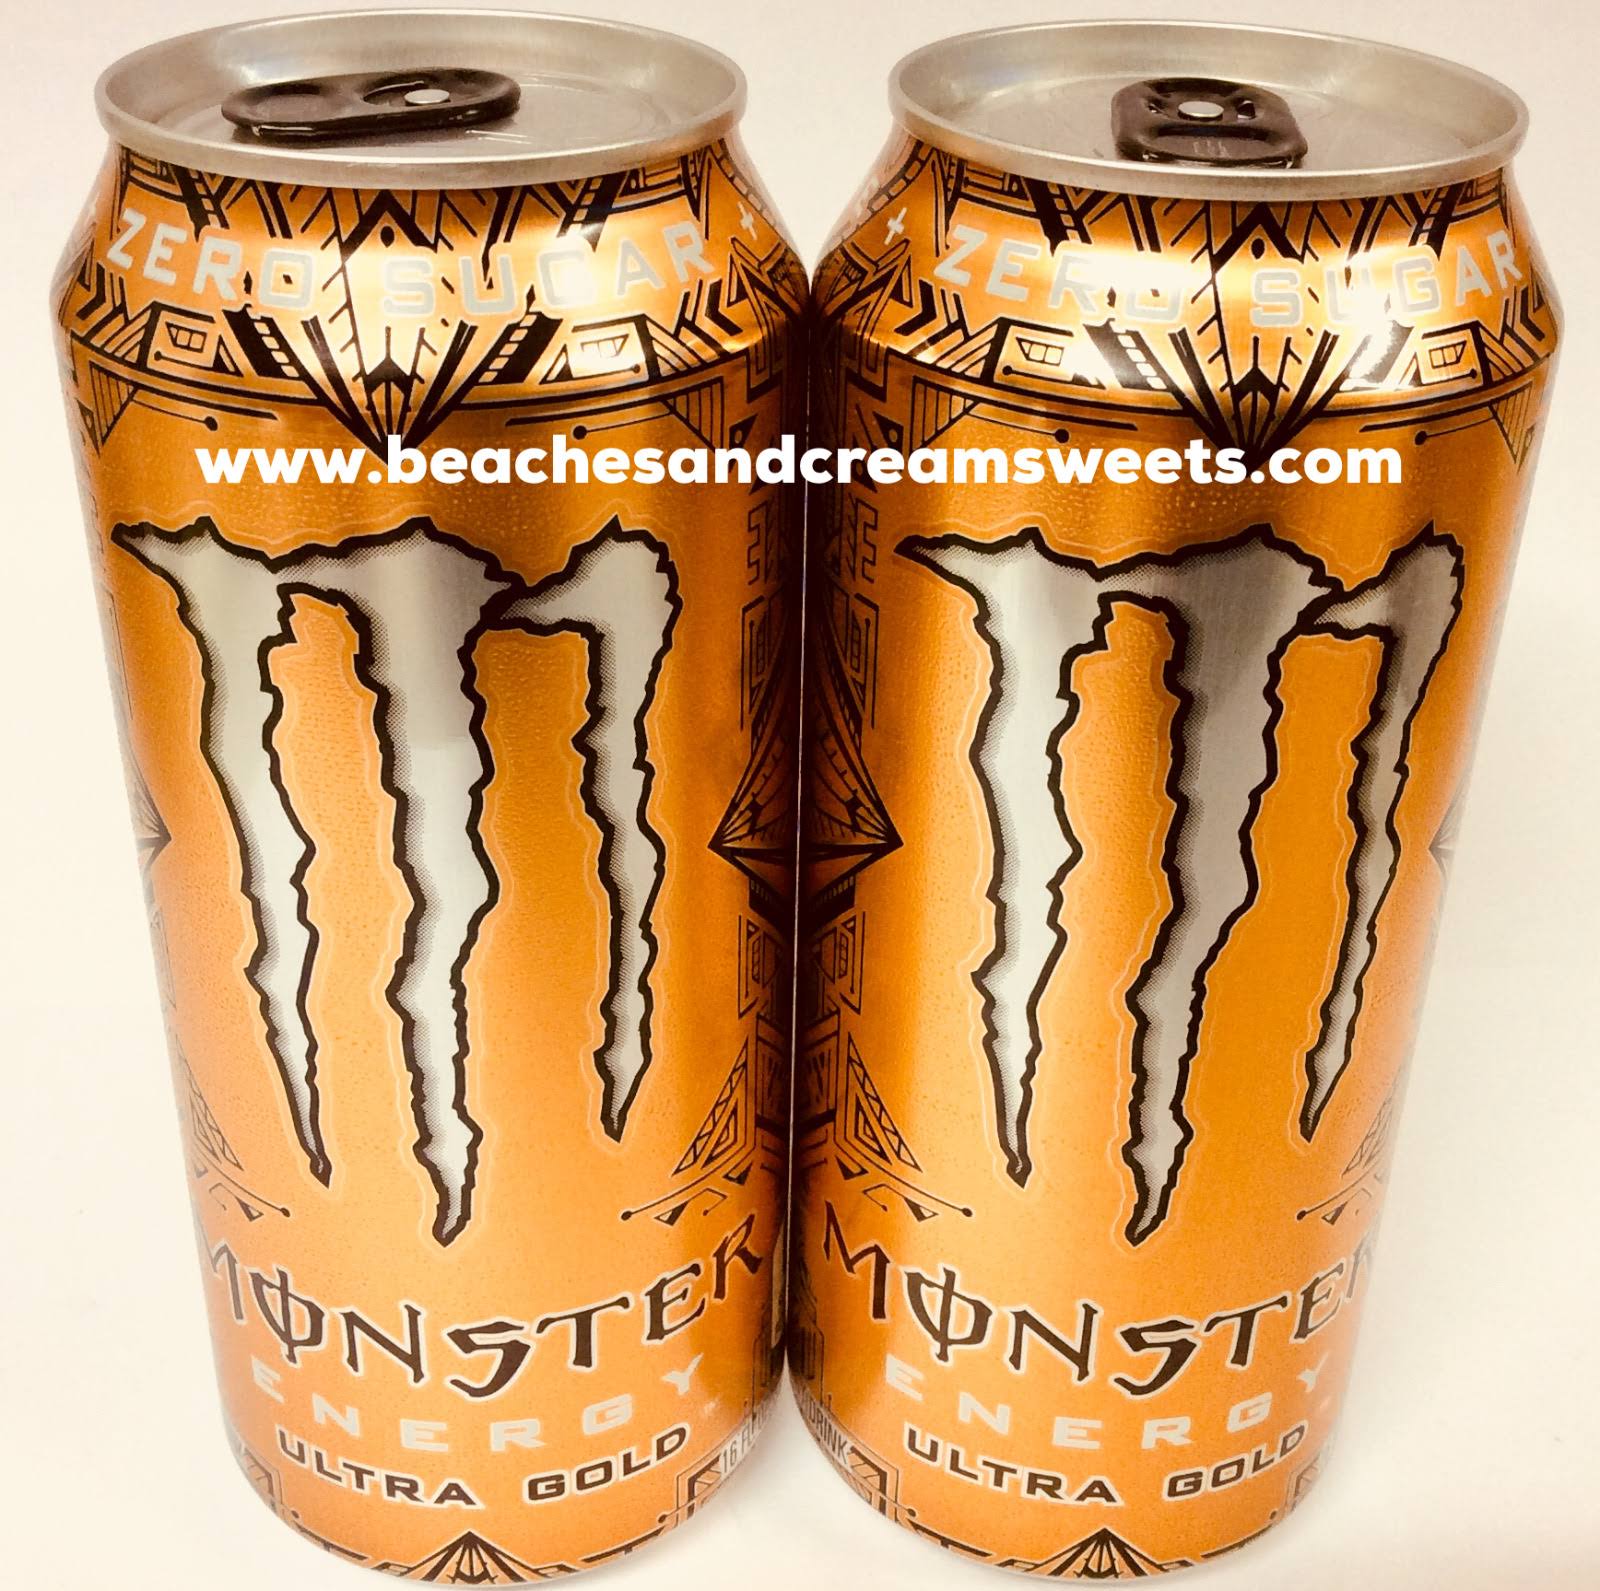 Two Cans of Monster Ultra Gold Rare American Import Caffeine Energy Drink